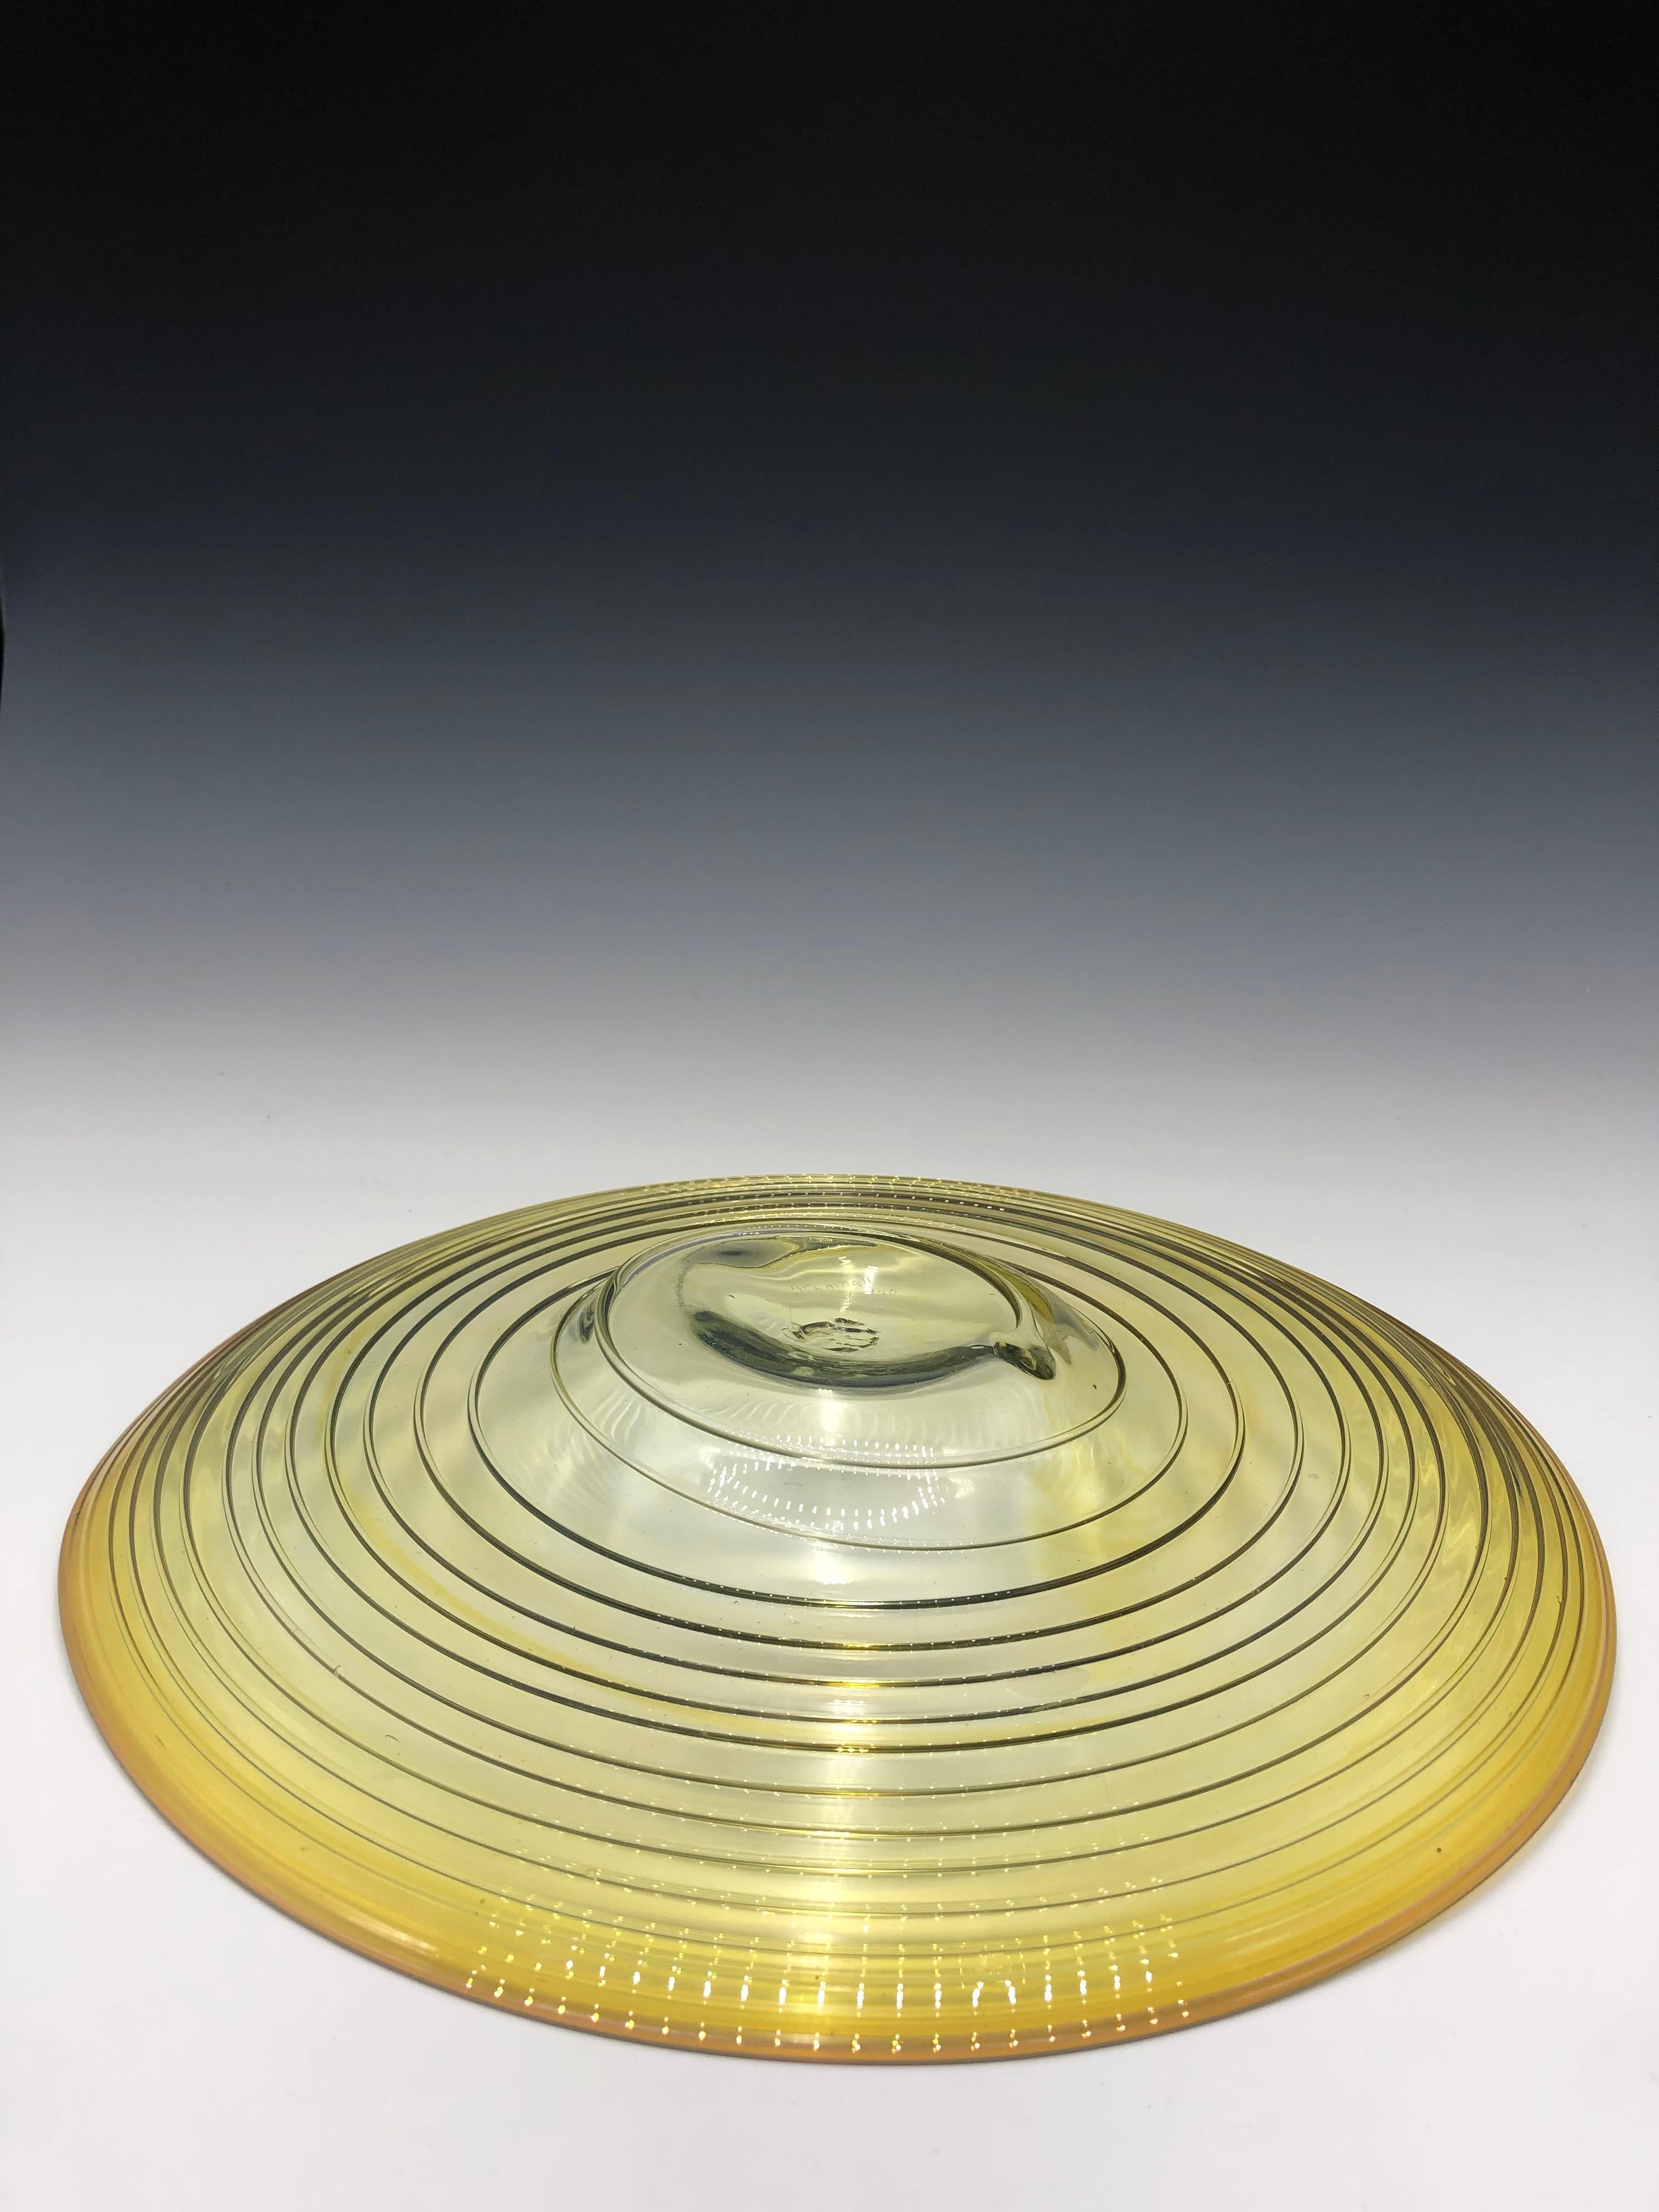 Vintage 1980s Hand Blown Studio Art Glass Plate by Peter Bramhall For Sale 5